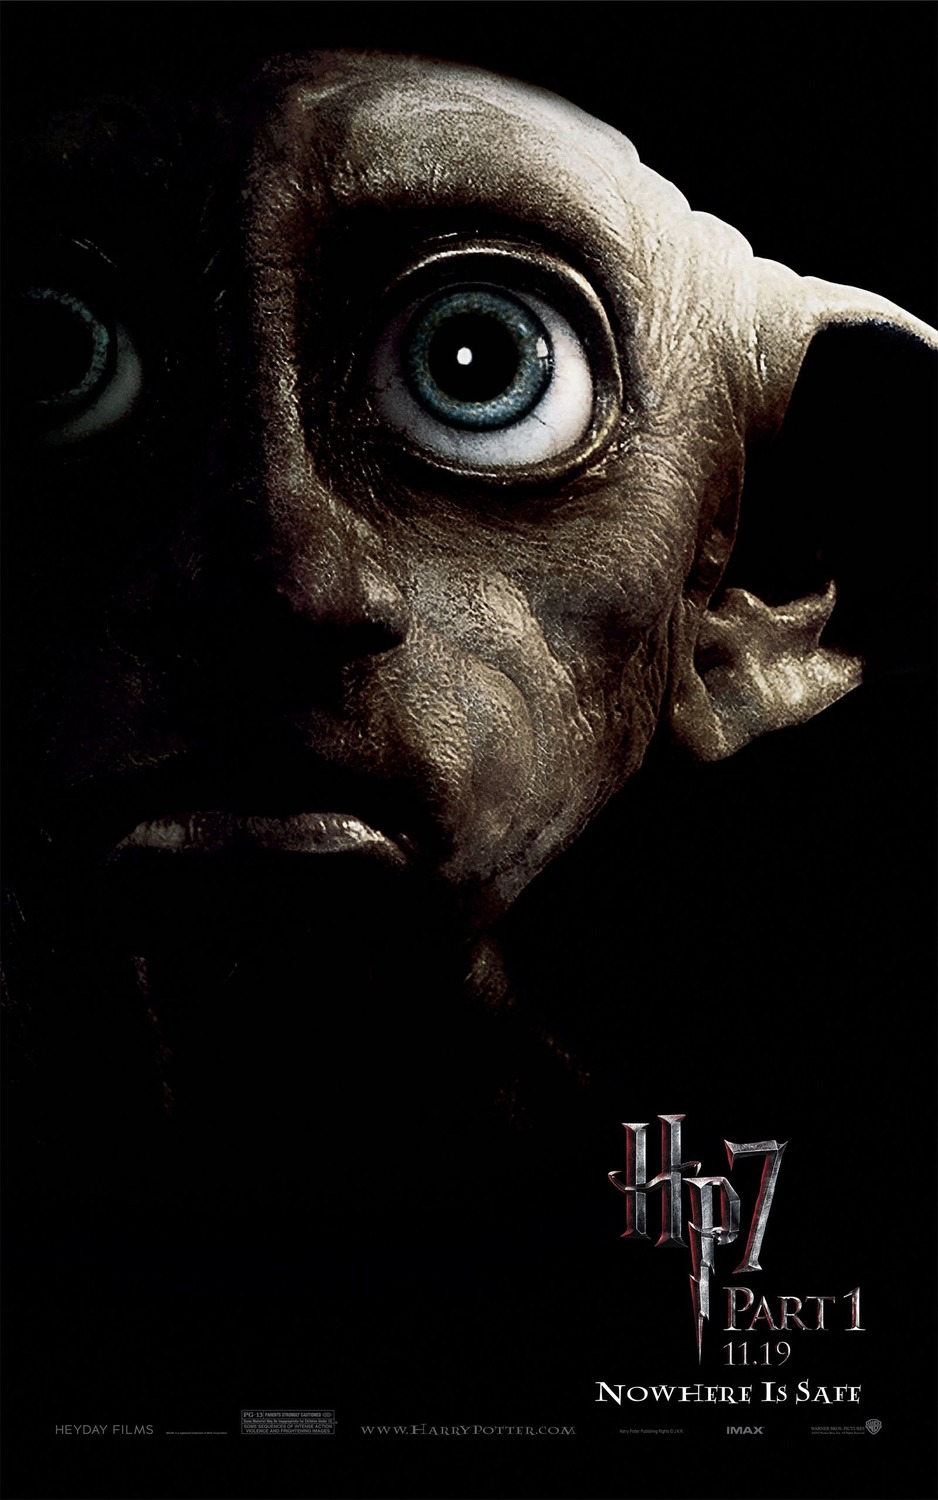 Extra Large Movie Poster Image for Harry Potter and the Deathly Hallows: Part I (#20 of 20)